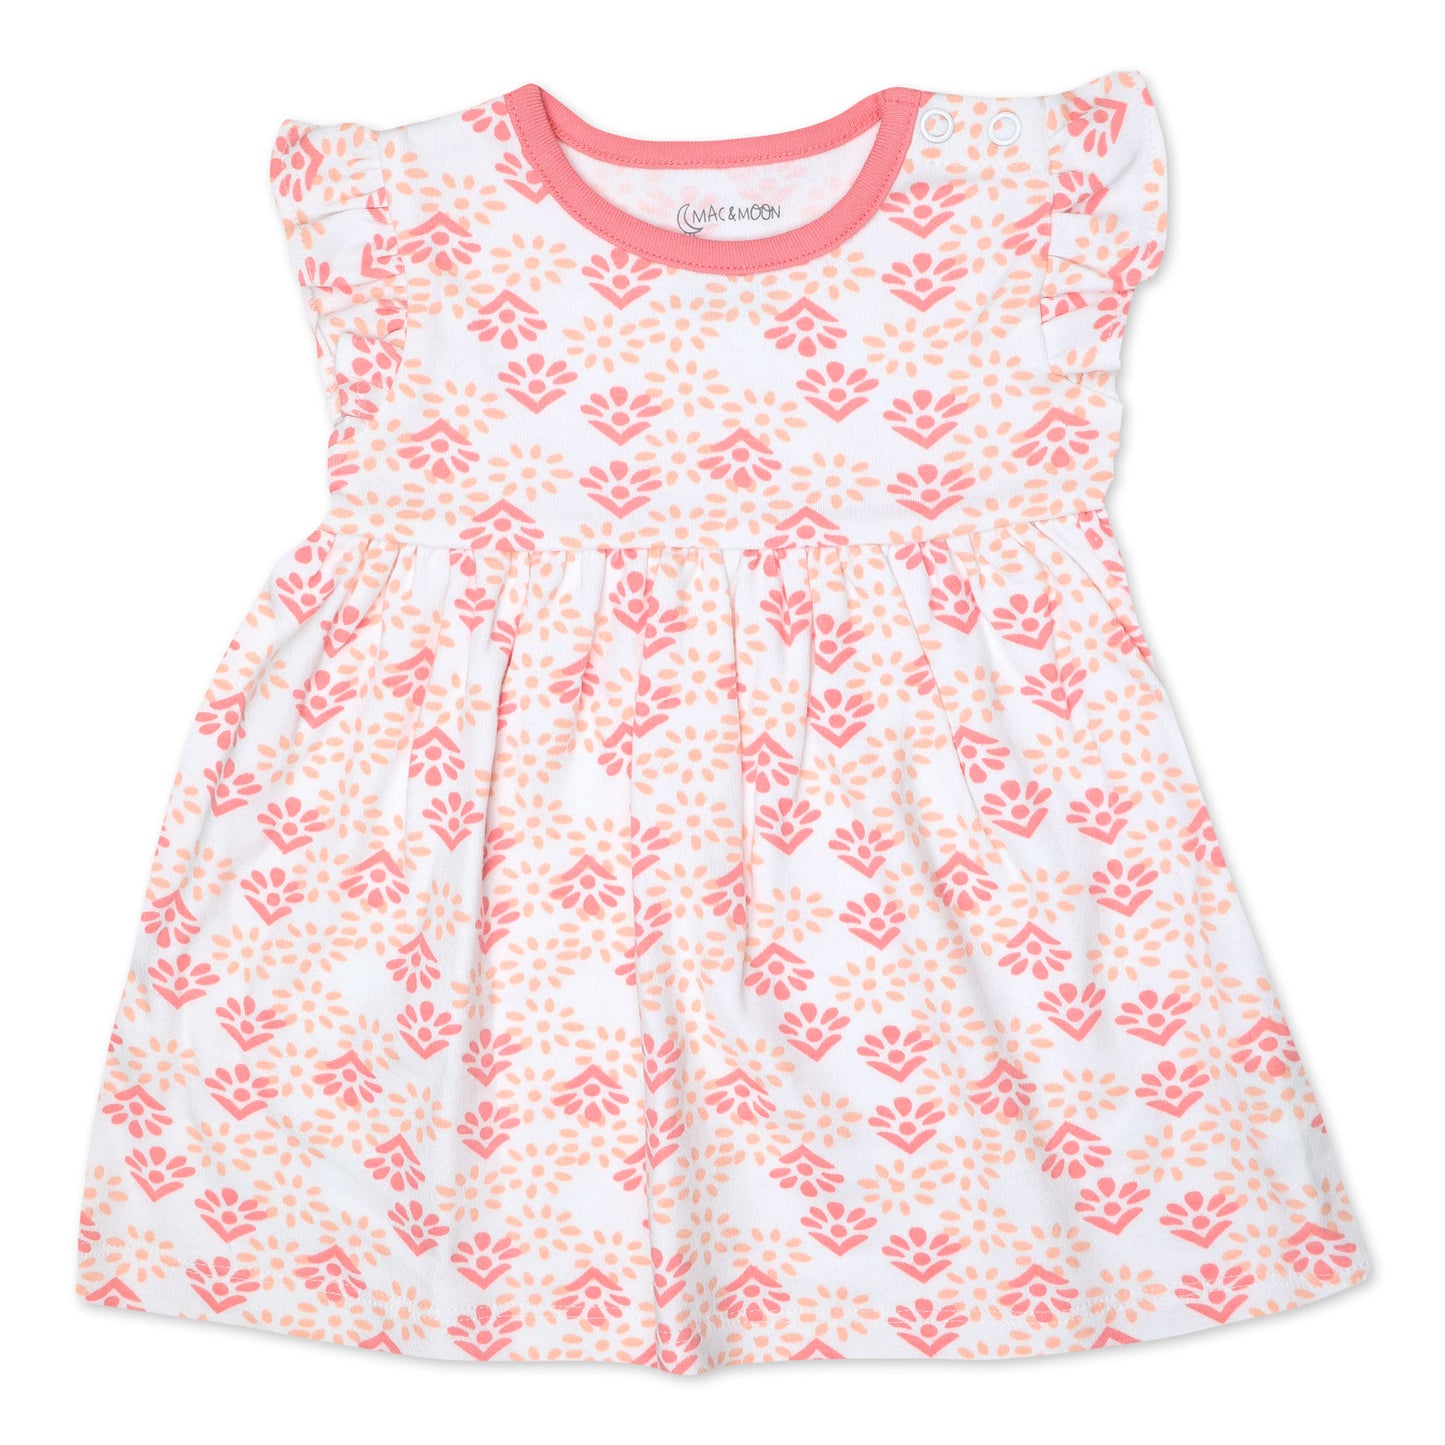 2-Pack Organic Cotton Dress Sets in Elephant Blooms Print